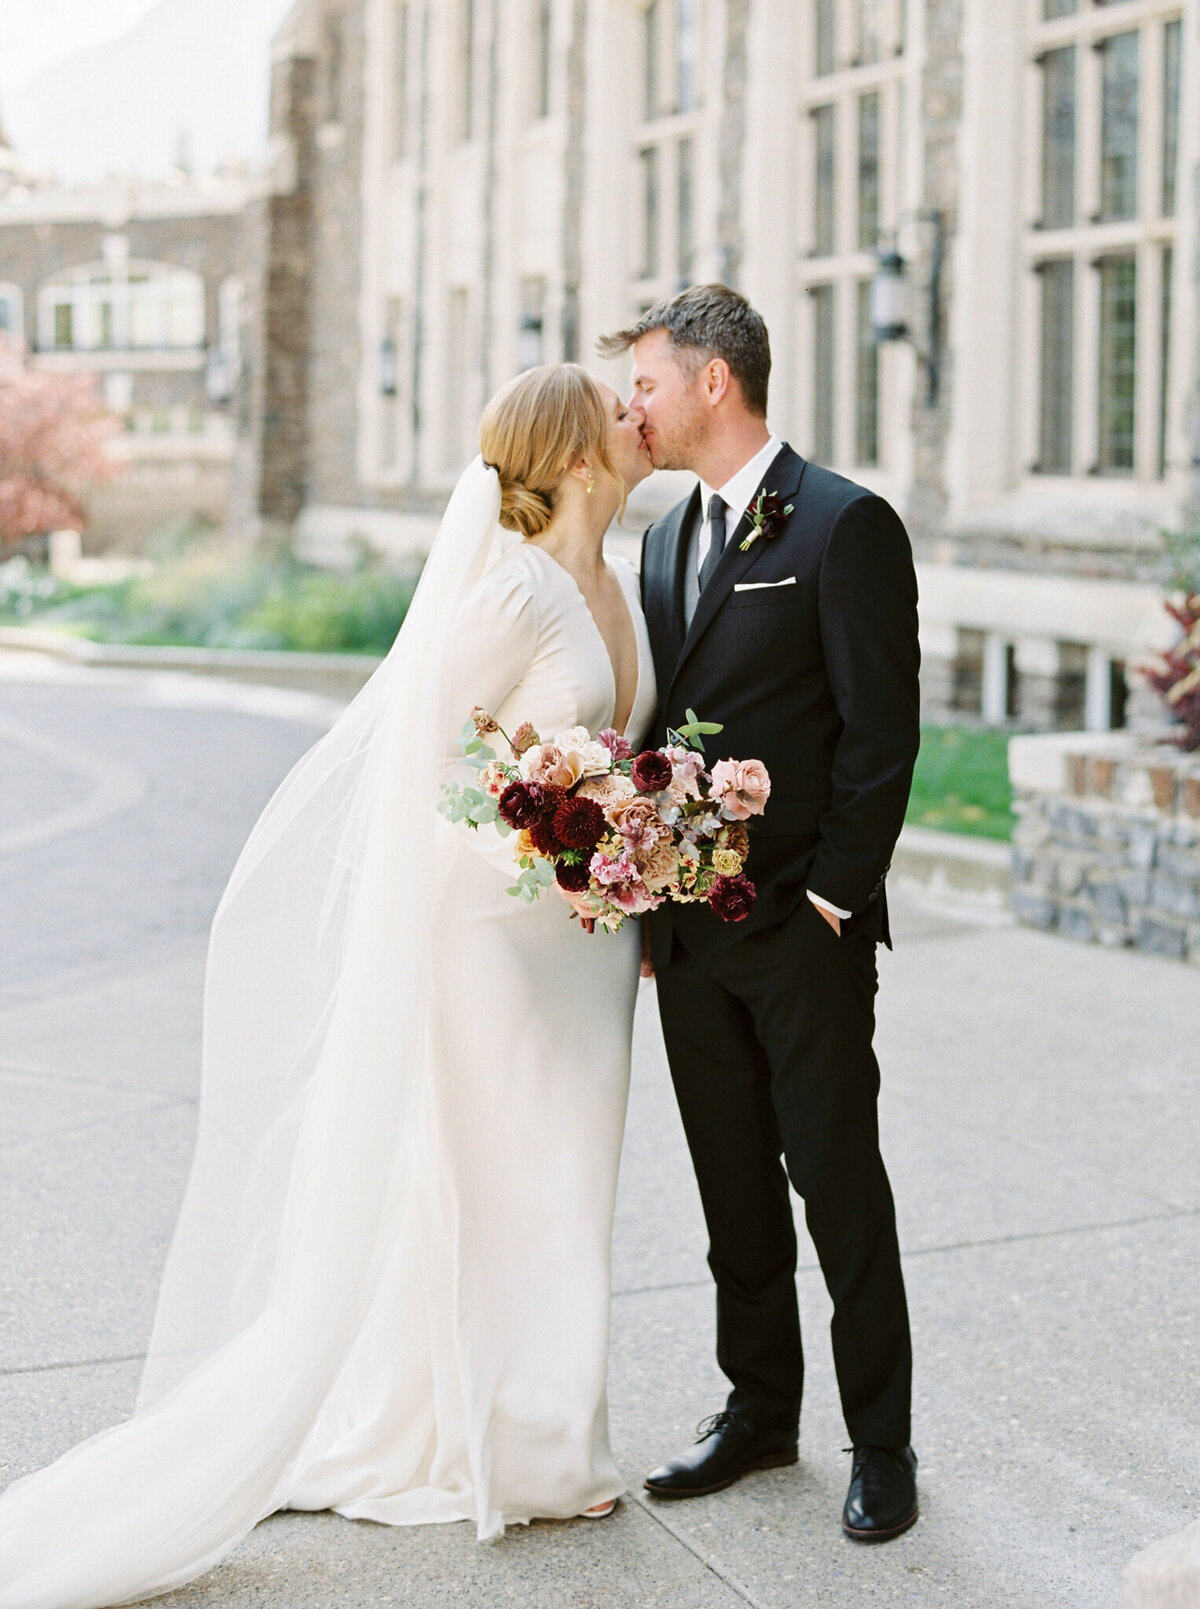 Elegant and timeless wedding inspiration, stunning couple in front of the Fairmont Banff Springs Hotel, captured by Justine Milton Photography, fine art  wedding photographer & videographer in Calgary Alberta. Featured on the Bronte Bride Vendor Guide.